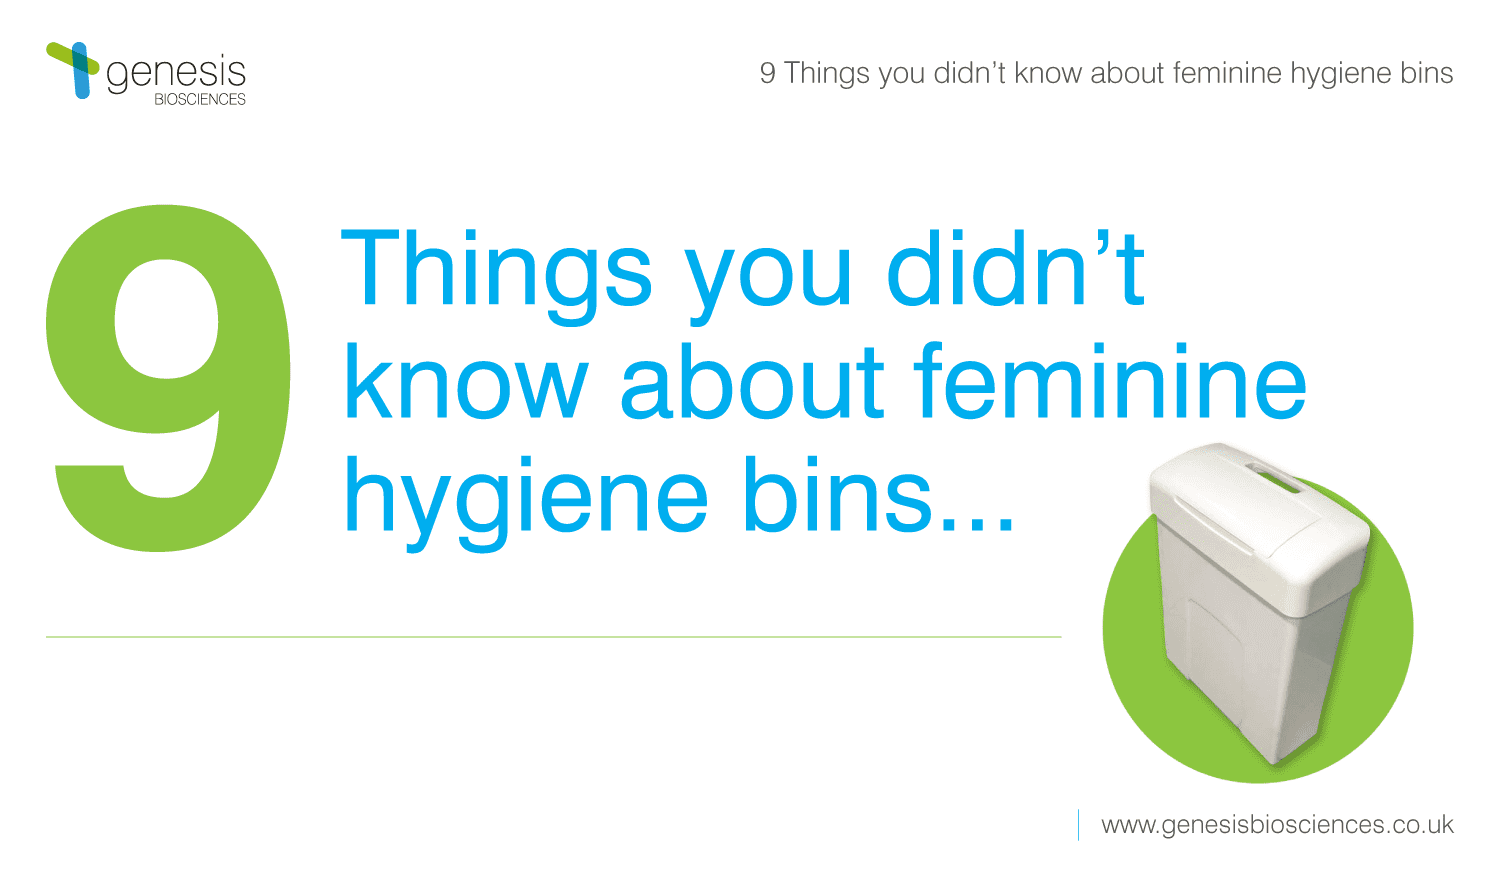 9 things you didn’t know about feminine hygiene bins